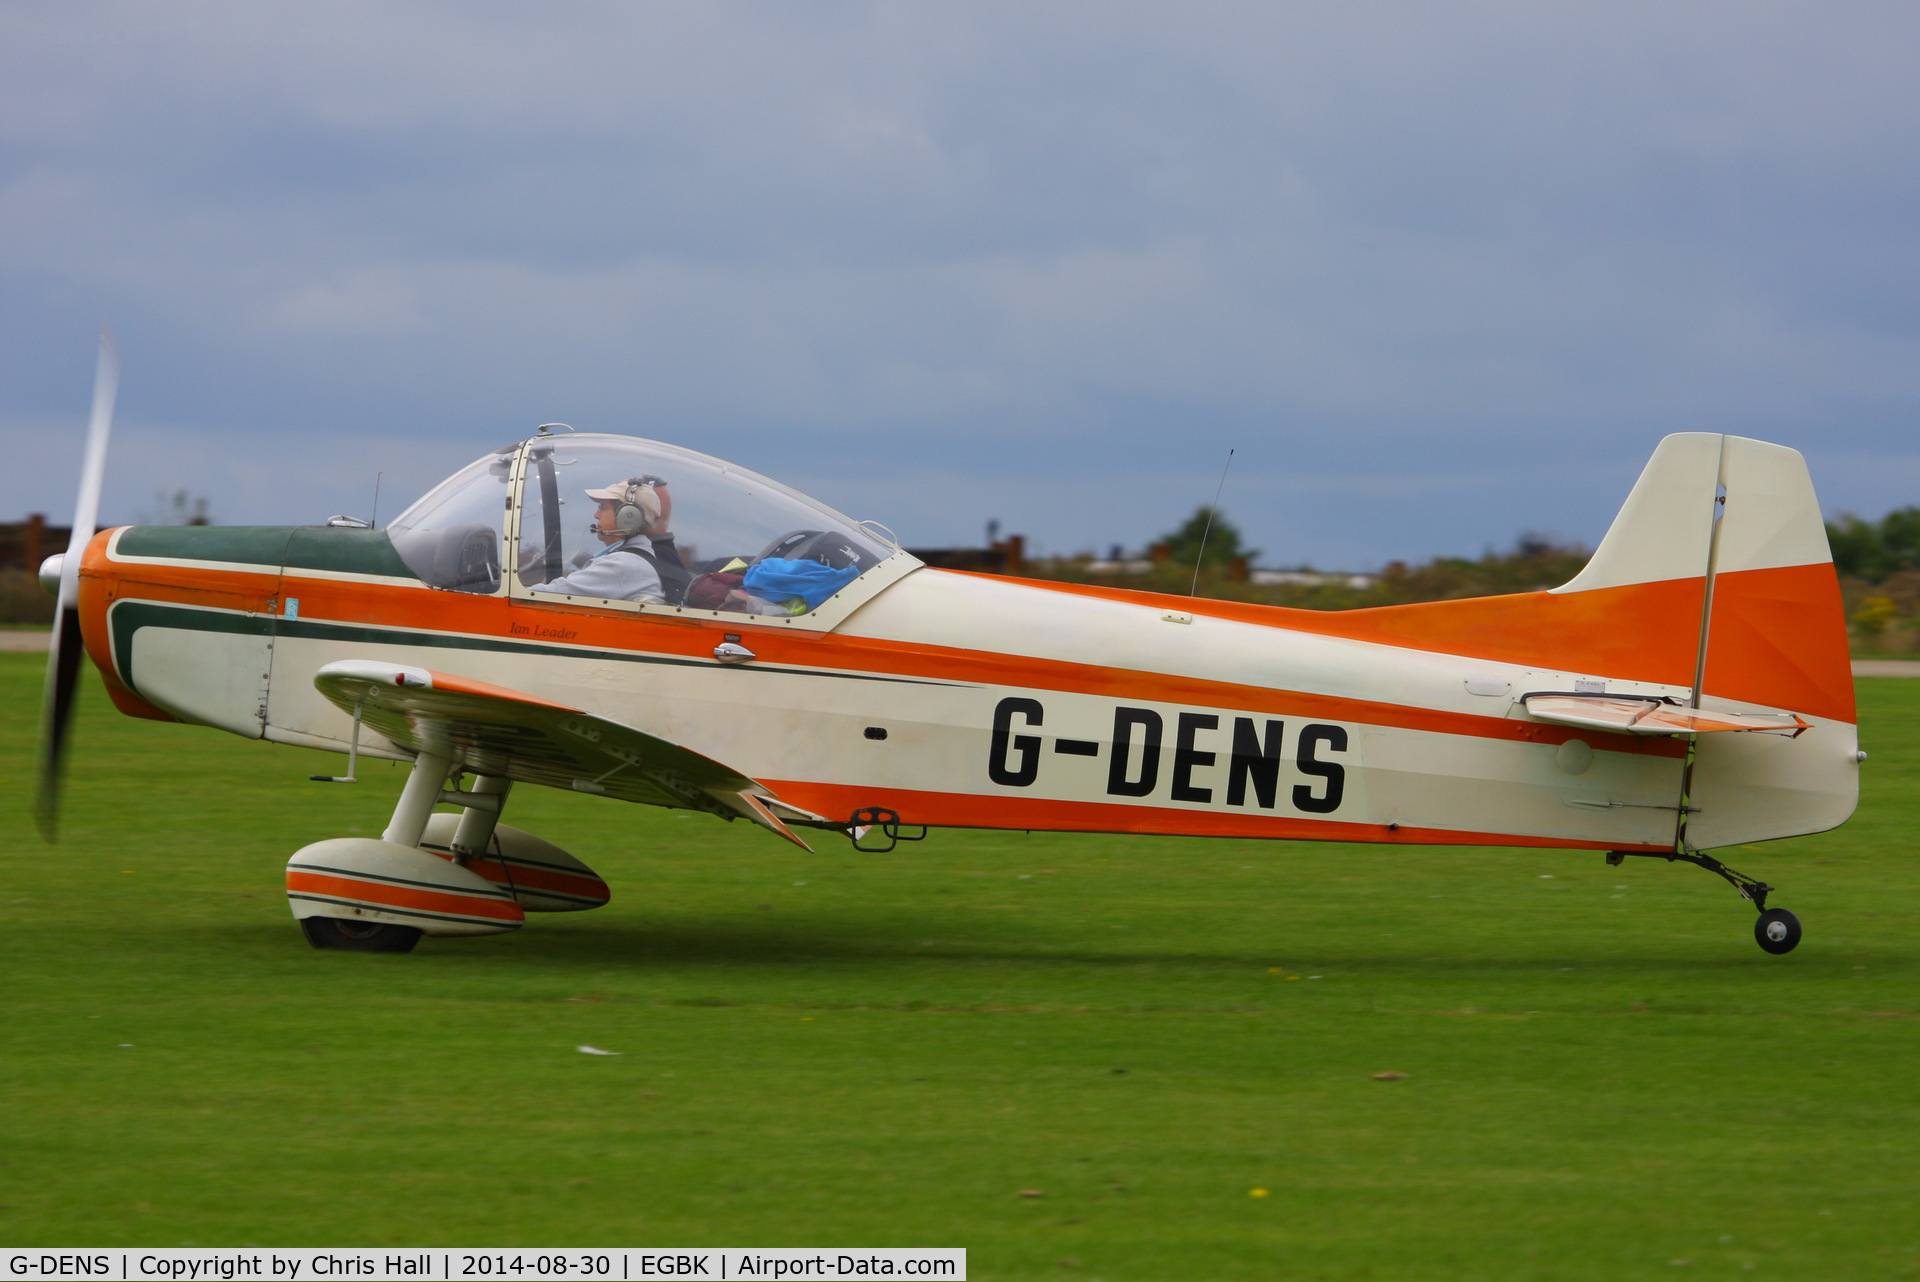 G-DENS, 1963 Binder CP-301S Smaragd C/N 121, at the LAA Rally 2014, Sywell